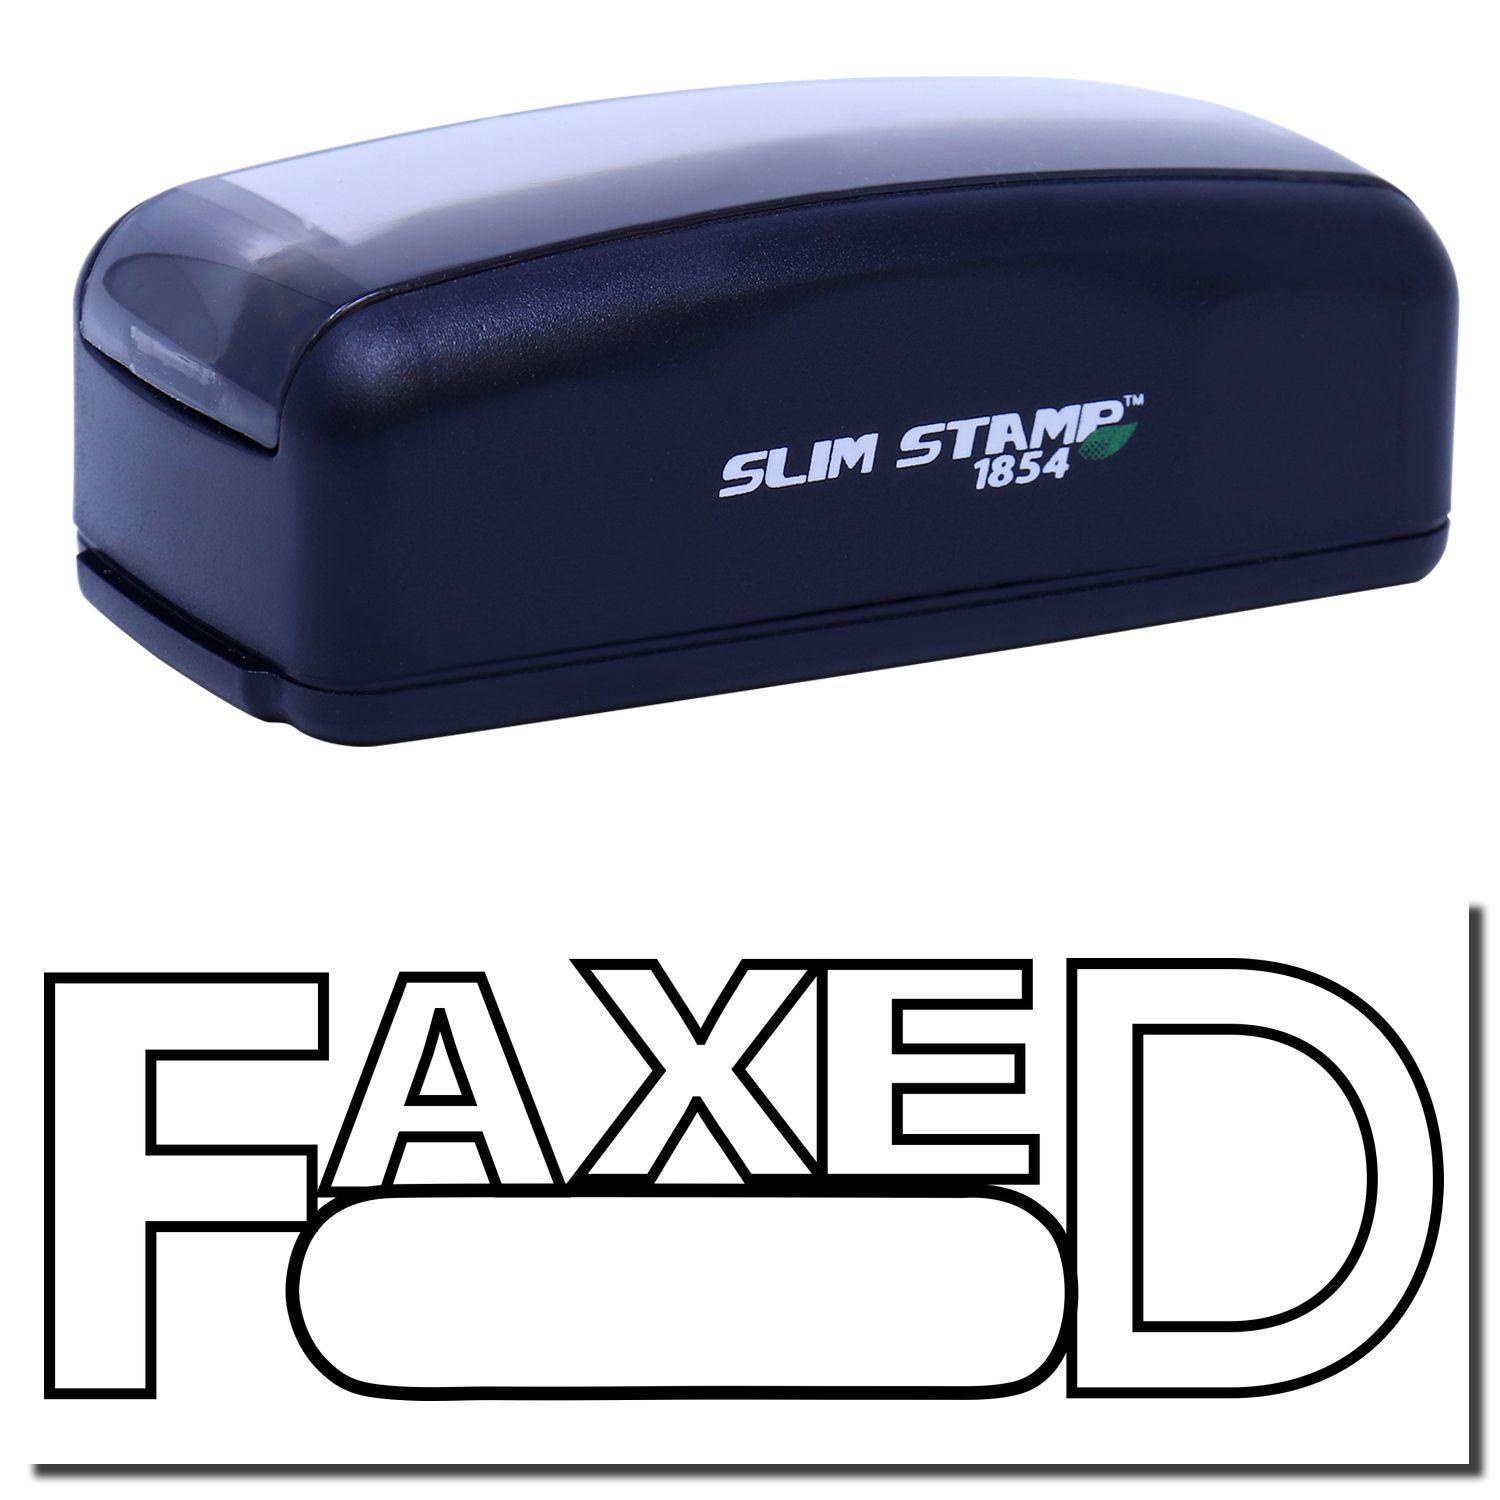 A large pre-inked stamp with a stamped image showing how the text "FAXED" in an outline font with a round date box is displayed after stamping.